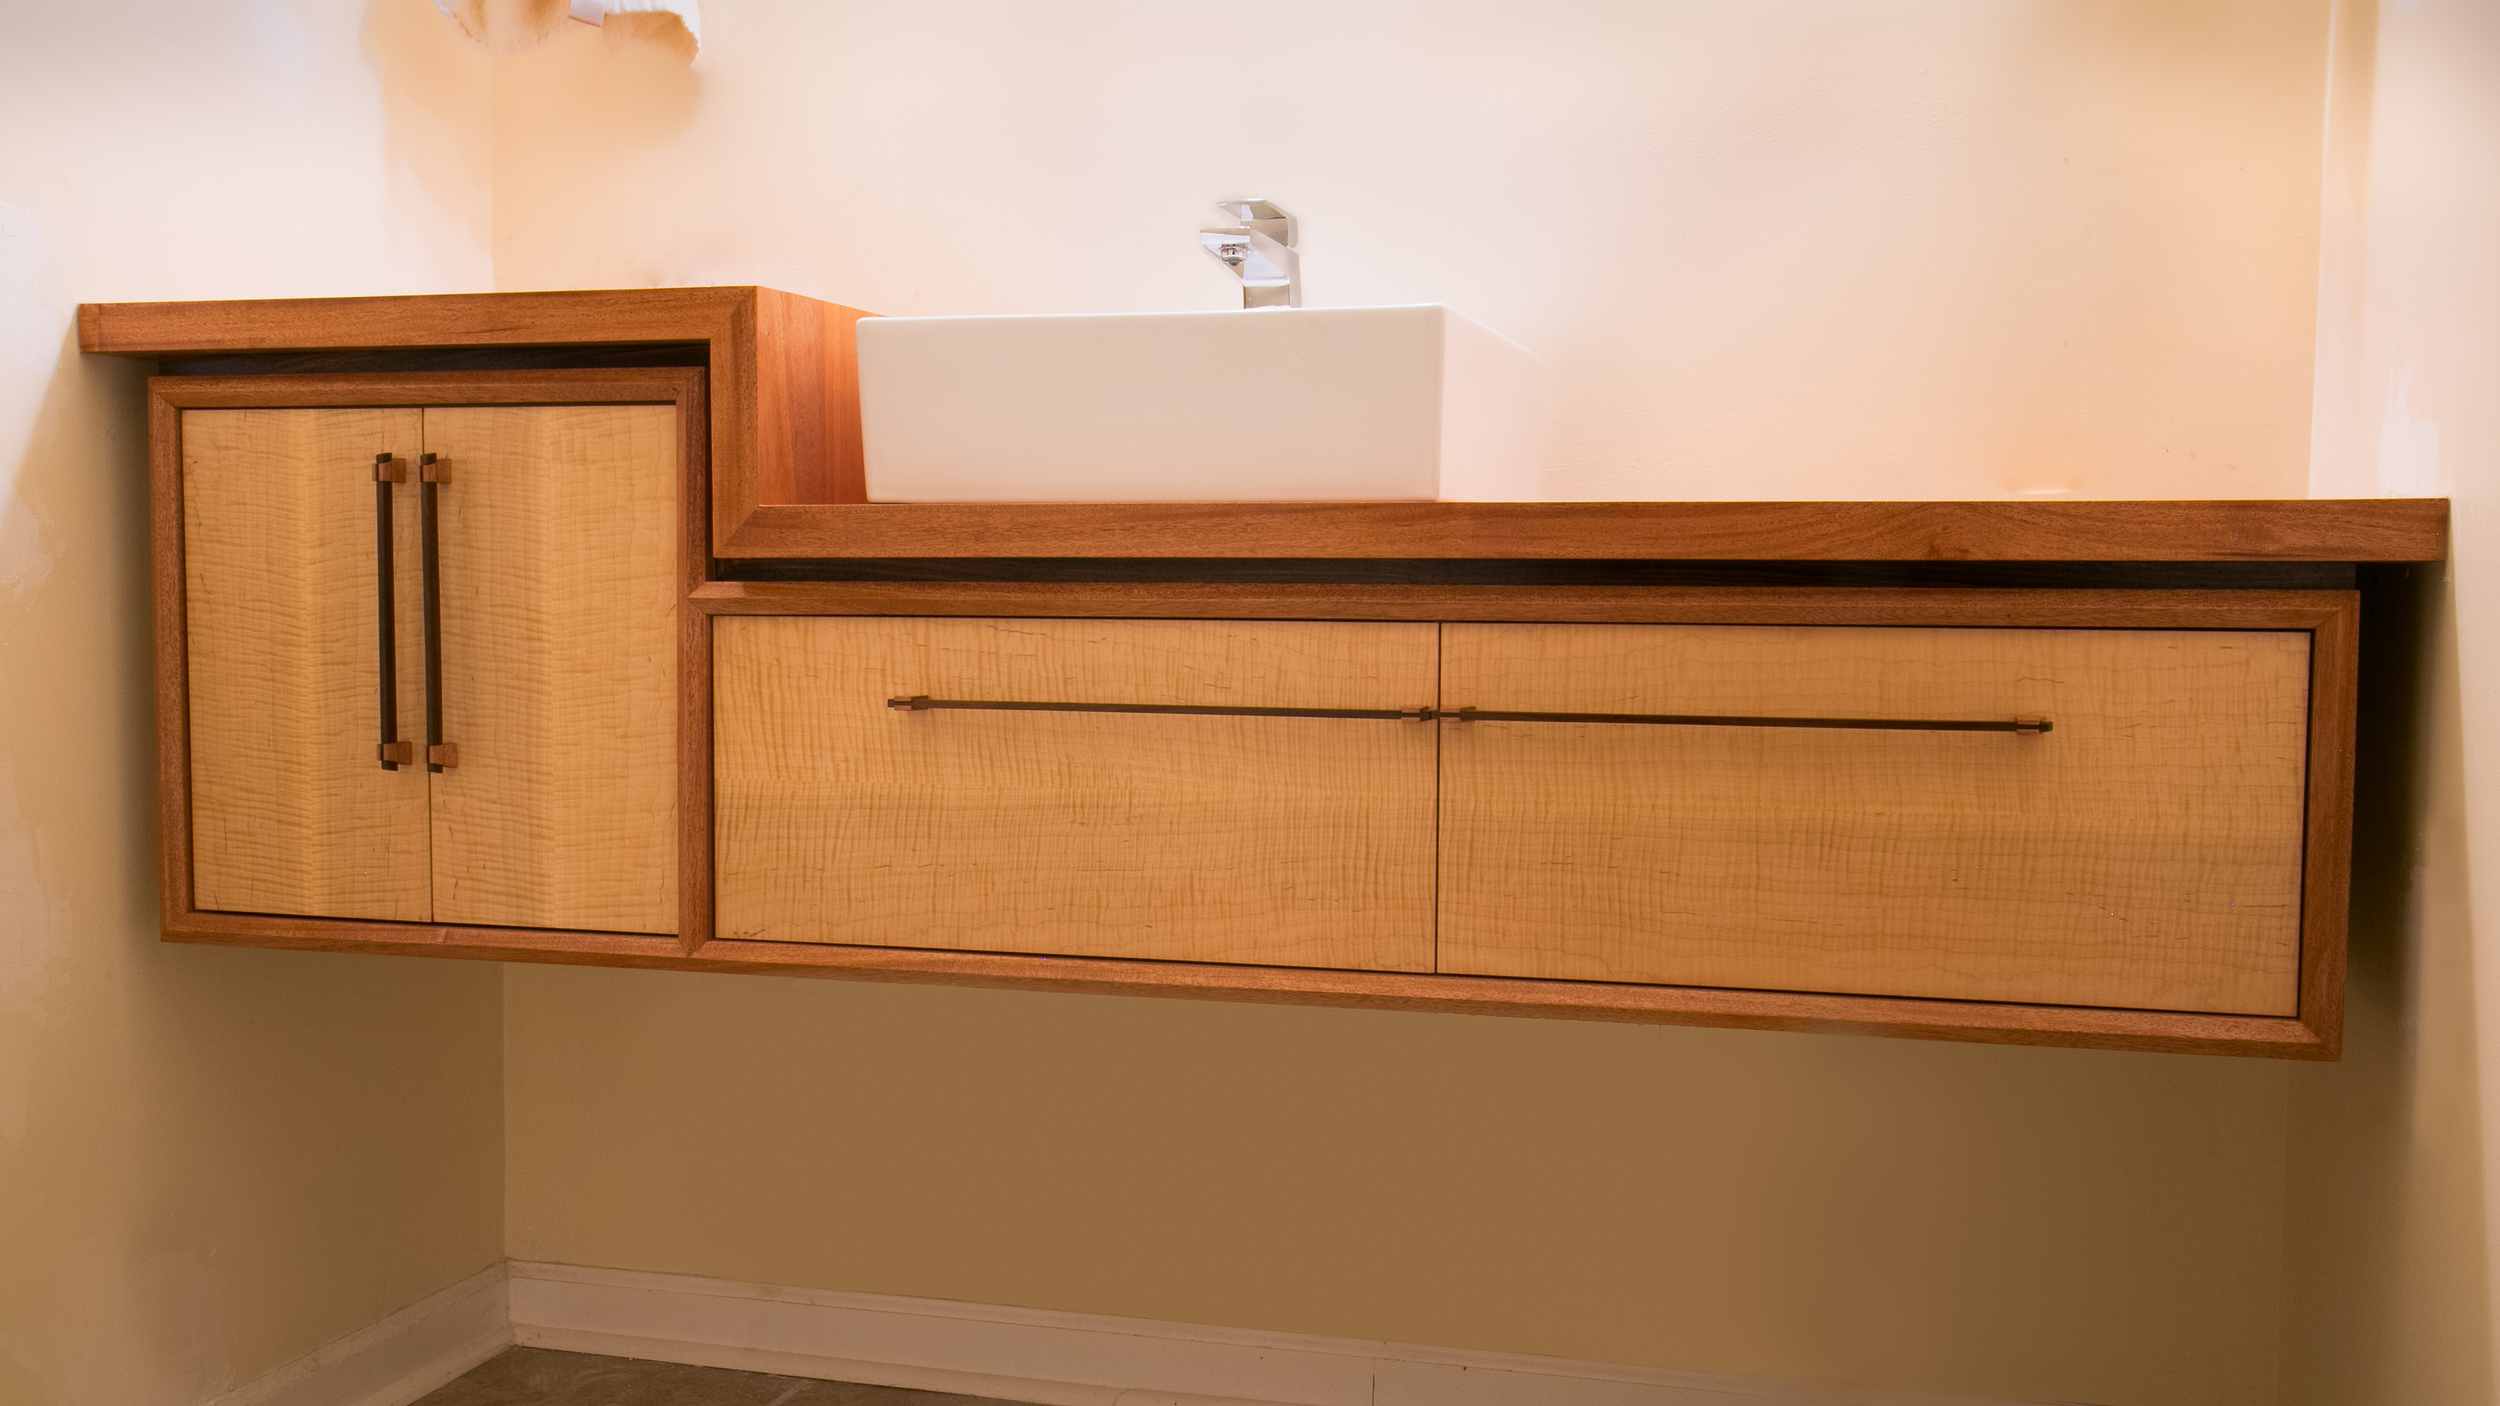 Sleek, modern floating bathroom vanity: Curly Maple with African Mahogany and Indian Rosewood detail